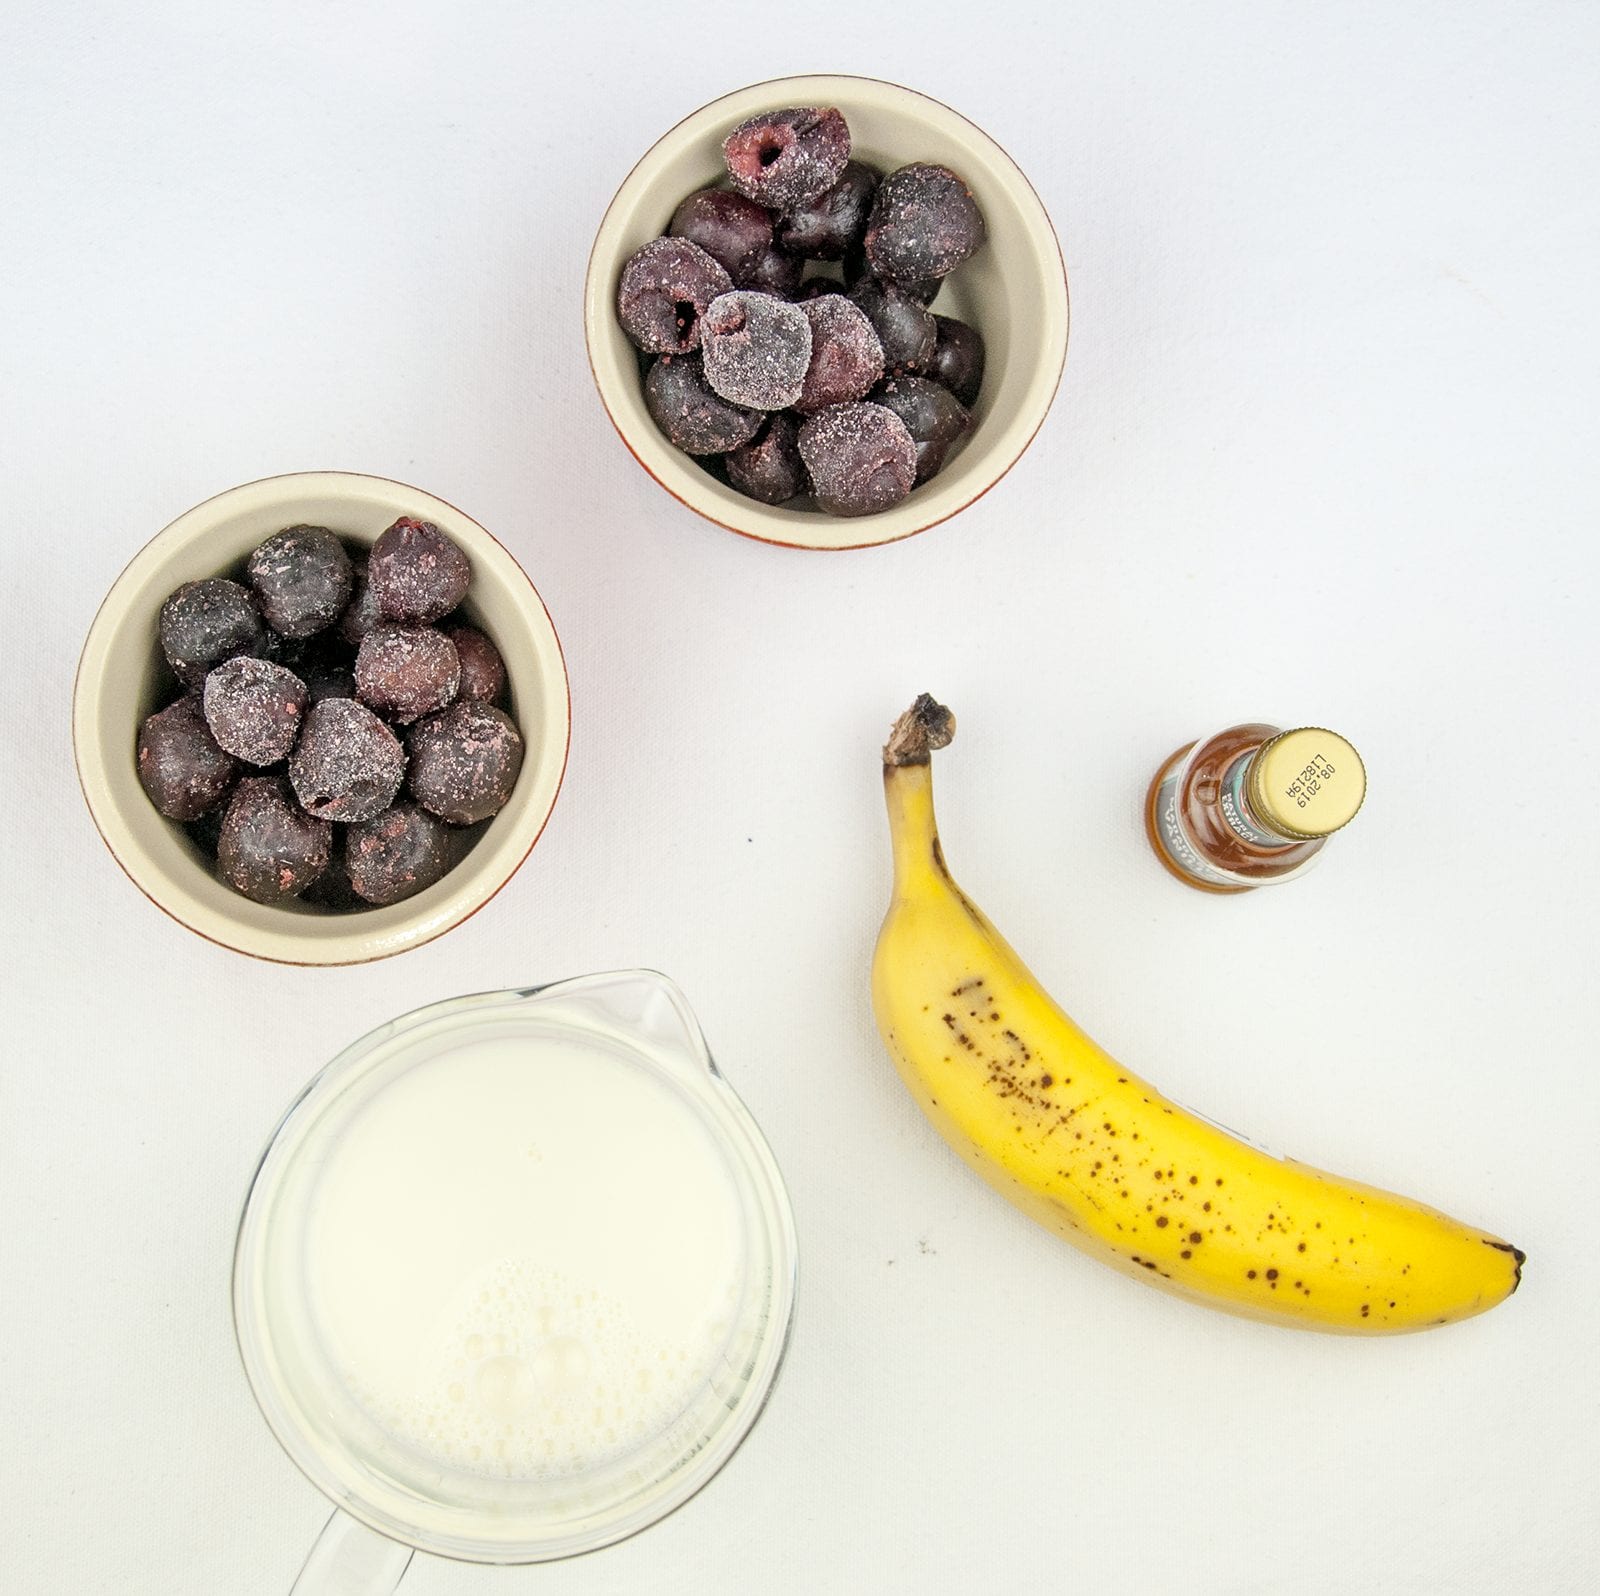 Look at this wonderful cherry and banana smoothie. Just 4 ingredients! Cherry, banana, milk, and a touch of vanilla essence. 1% fat and only 324 calories! Yum! | theyumyumclub.com